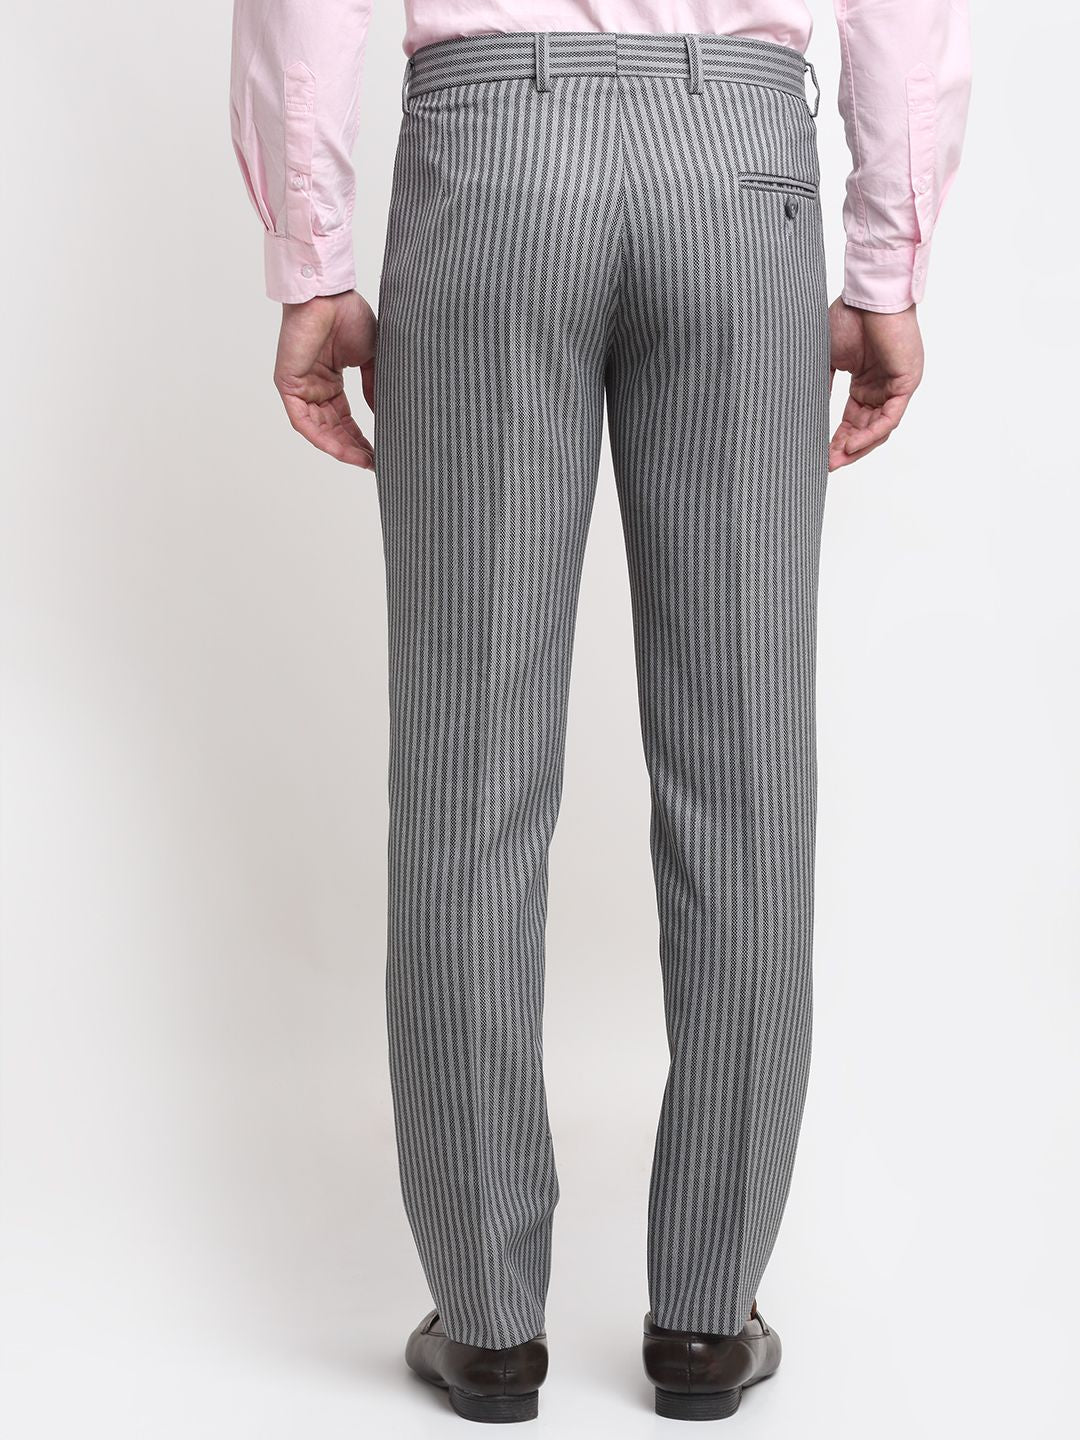 Men charcoal grey striped, slim fit stripped formal trousers